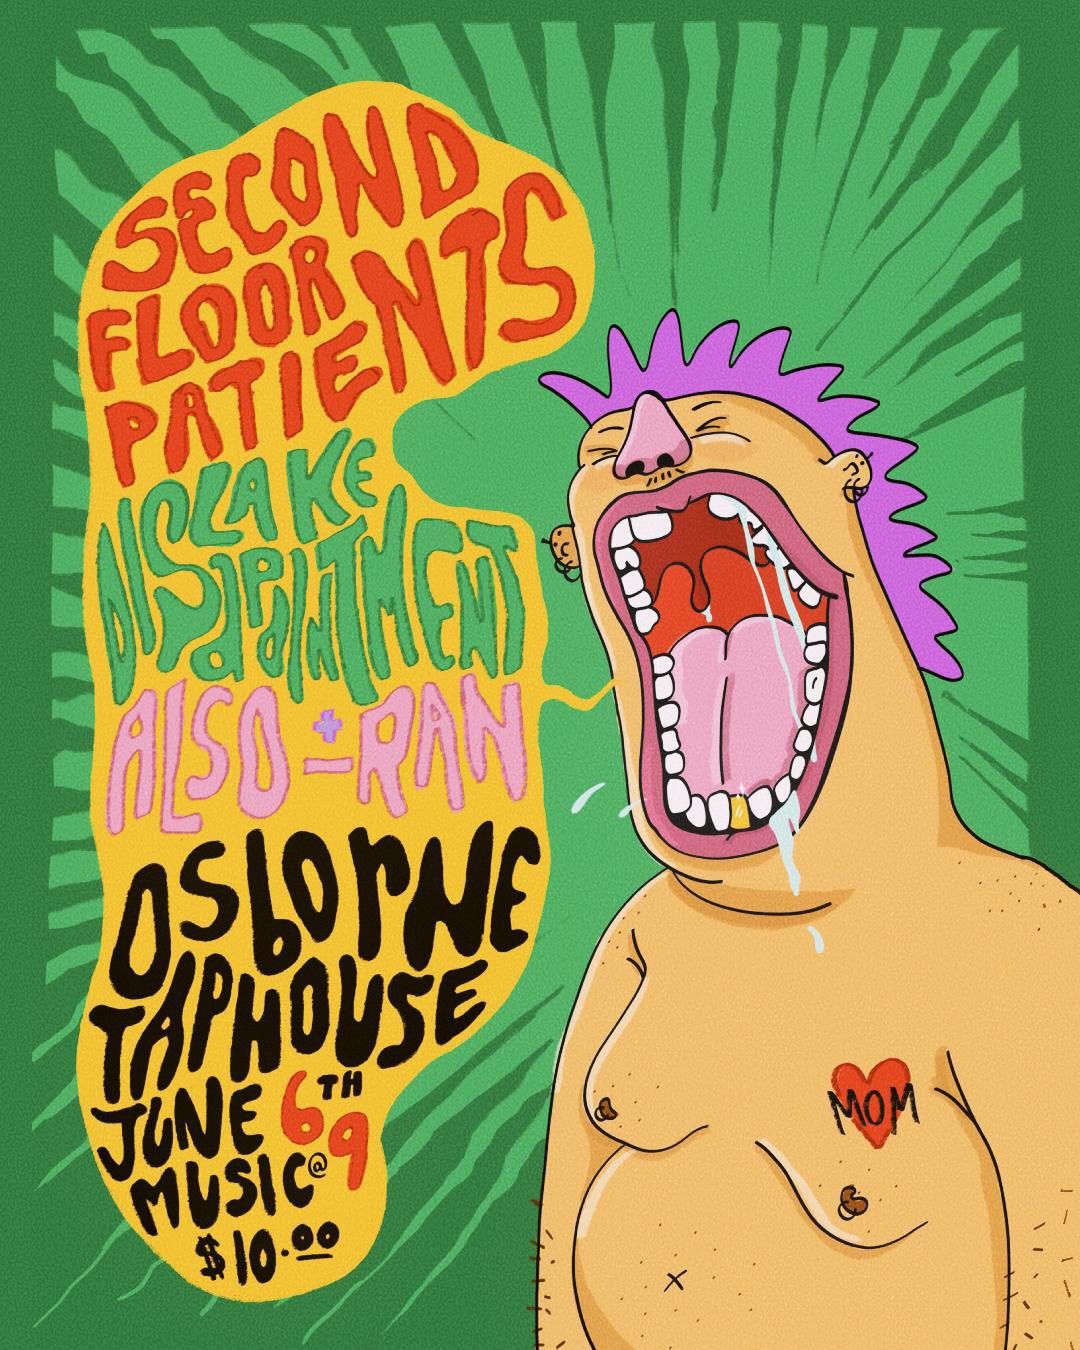 Also-Ran, Lake Disappointment, Second Floor Patients Live at Osborne Taphouse!